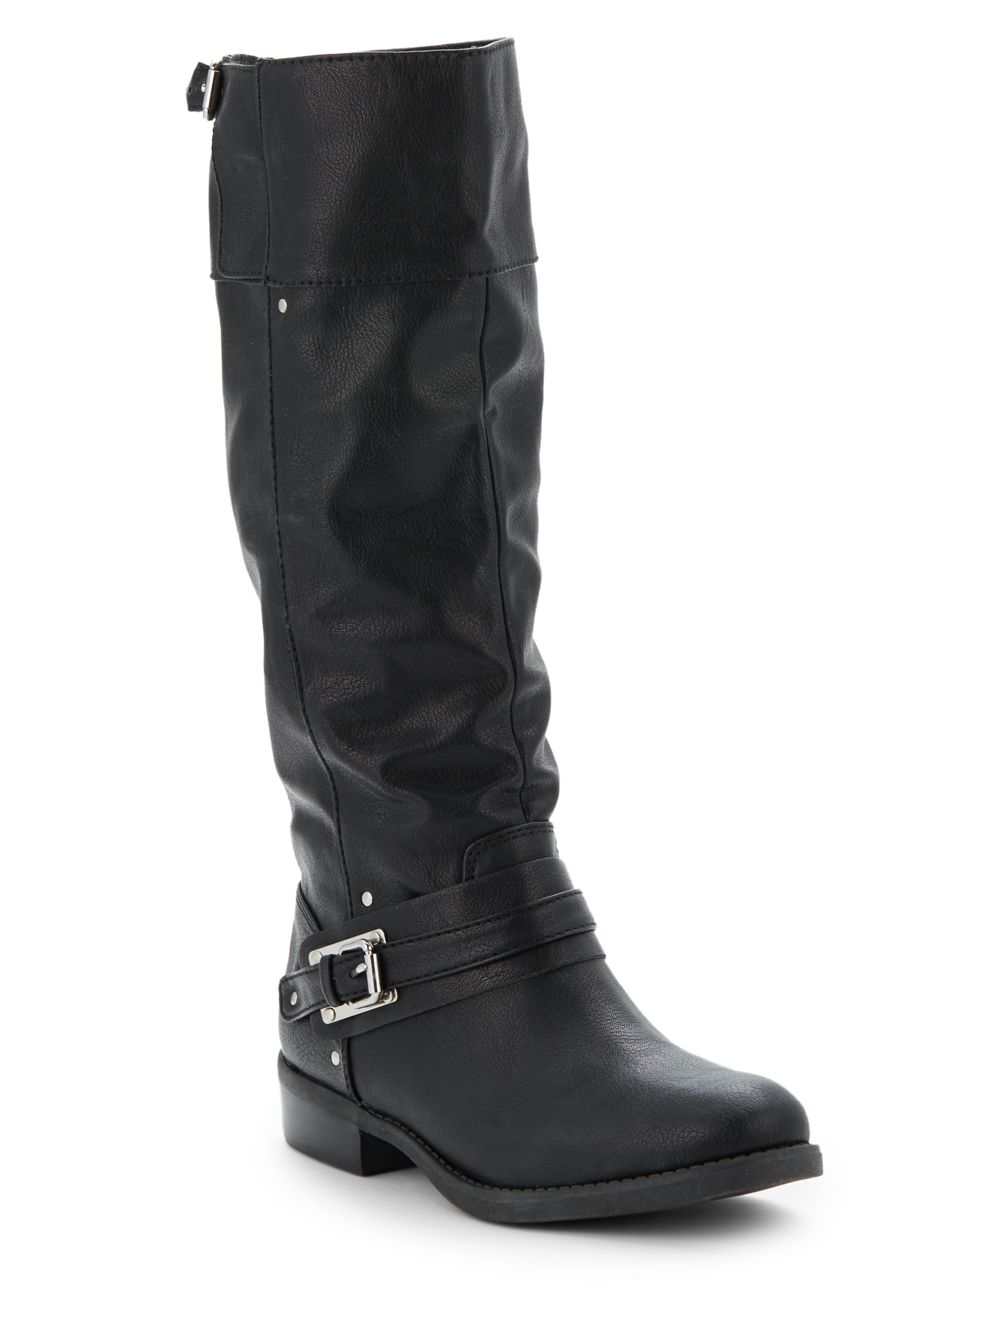 Dolce Vita Lasso Leather Knee High Boots in Black | Lyst